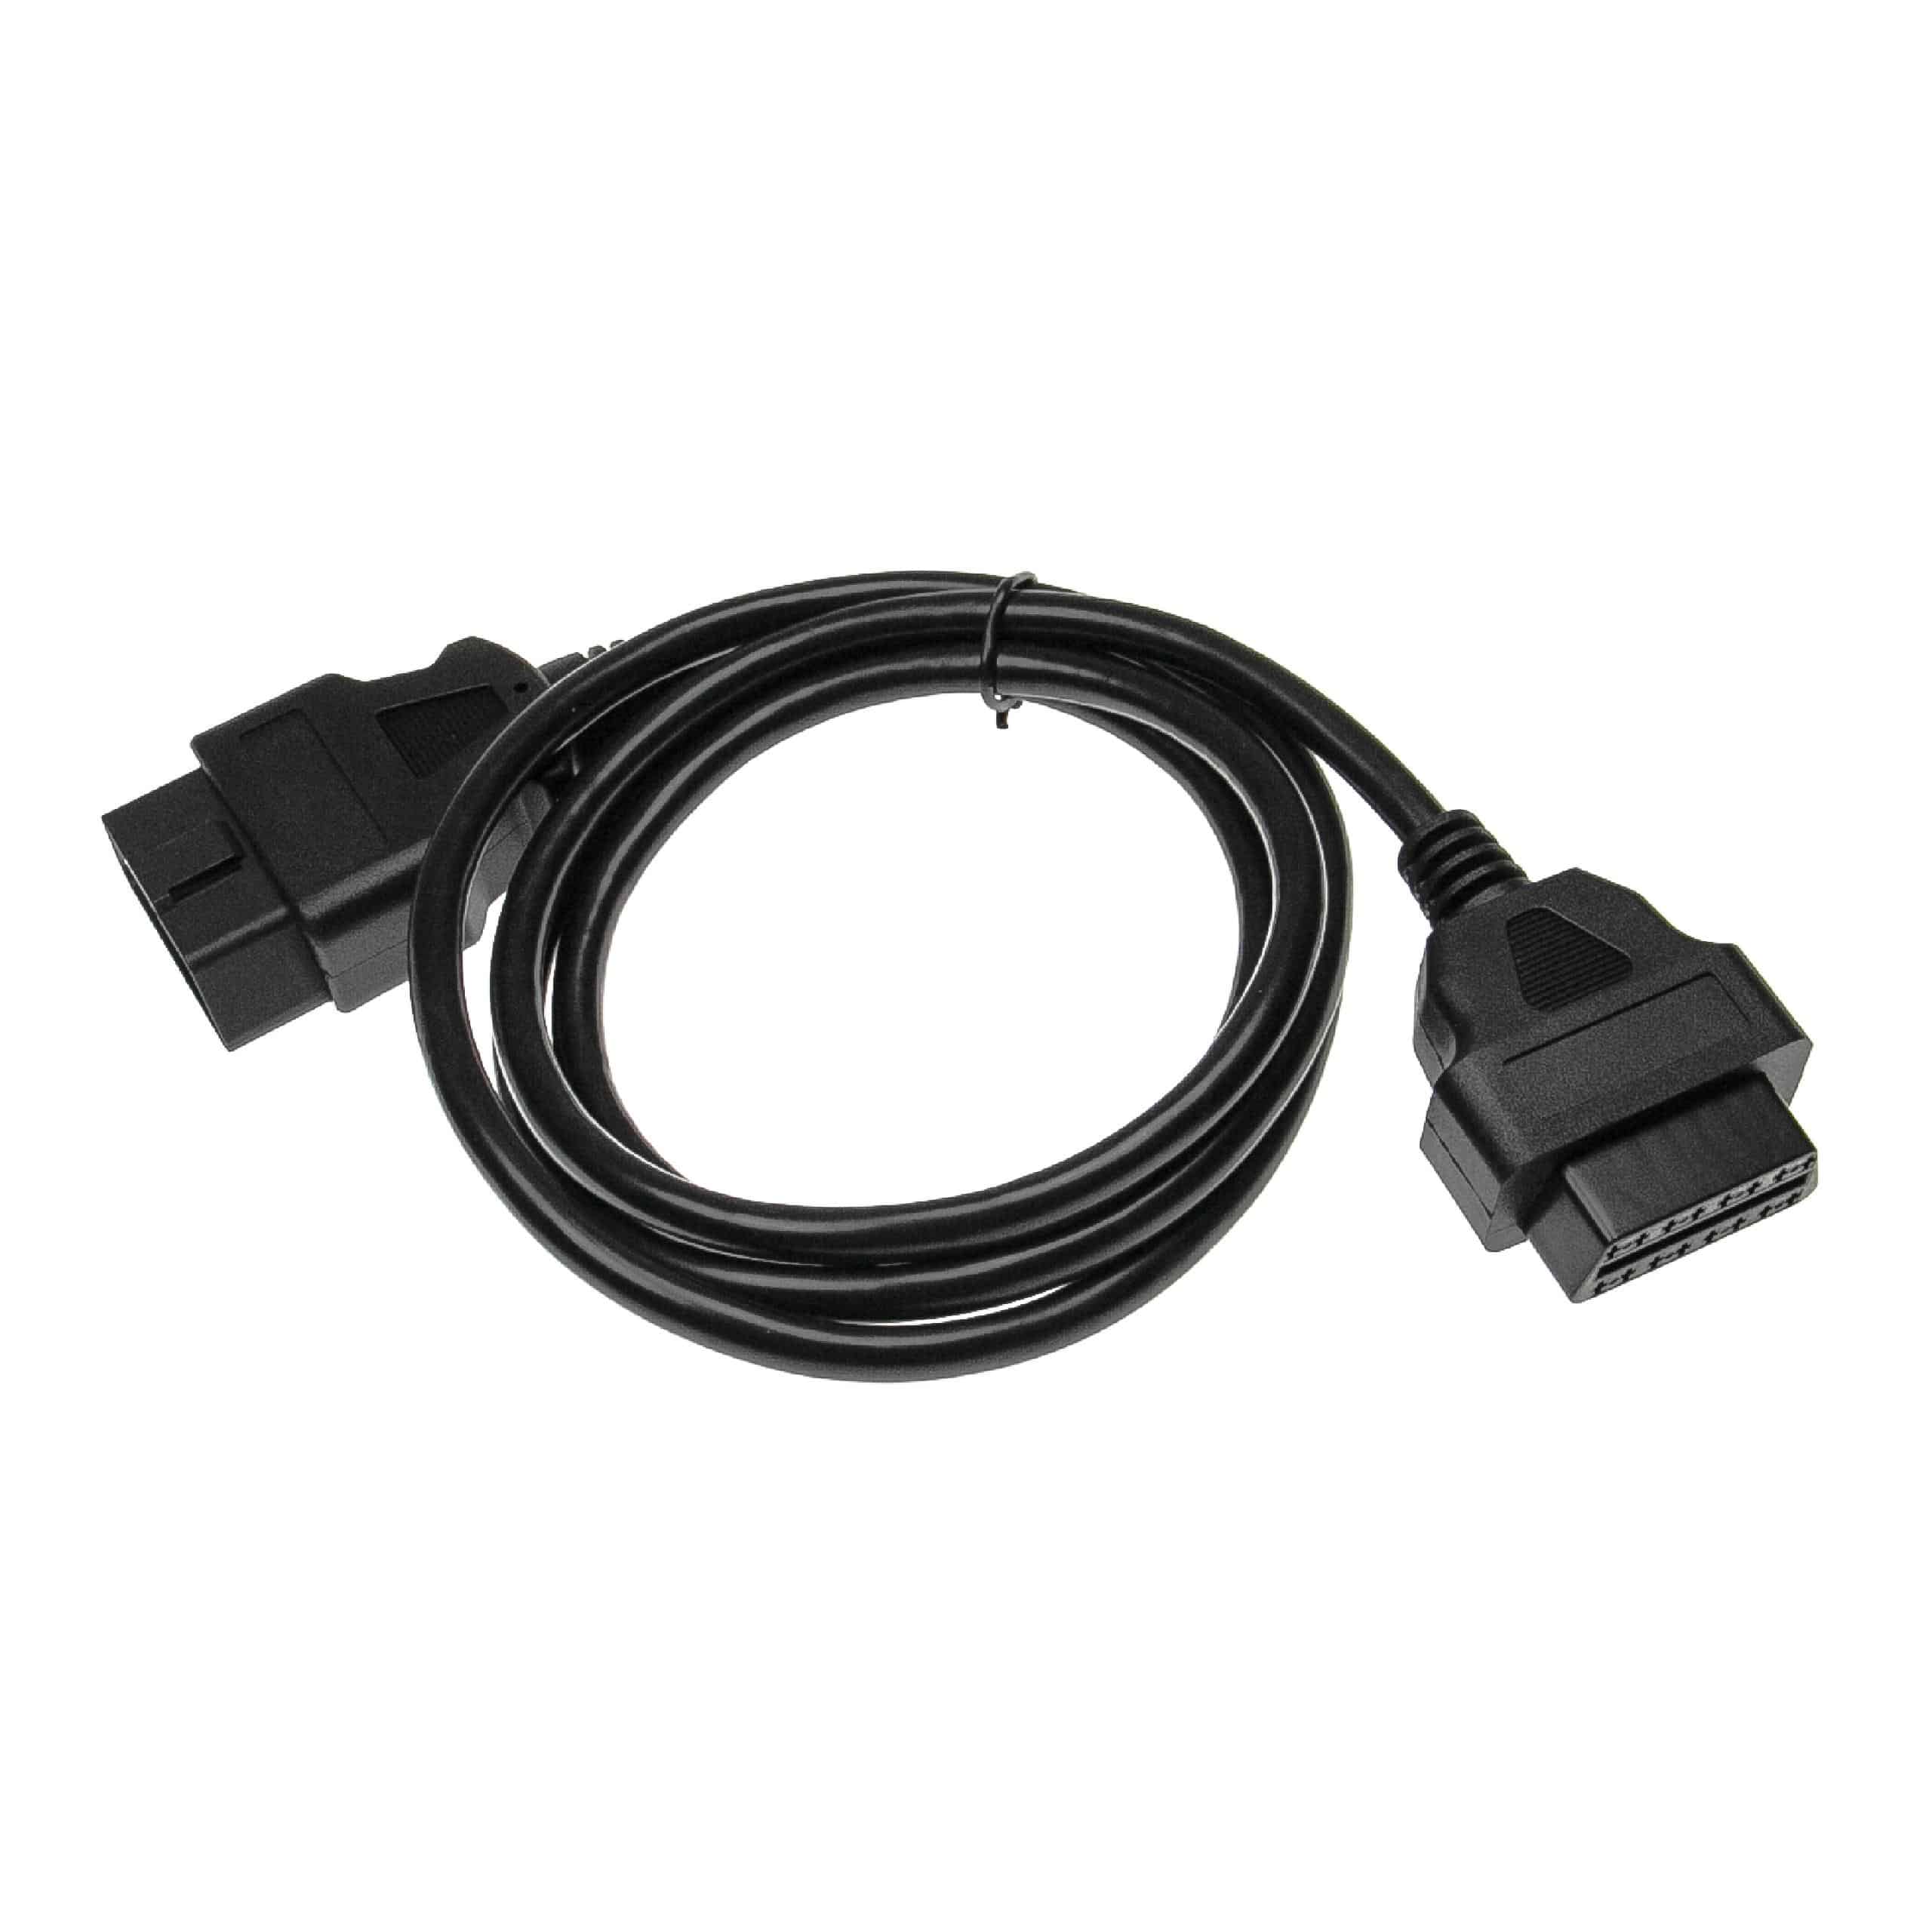 vhbw OBD2 Extension Cable OBD2 16 Pin (f) to 16 Pin (m) for Vehicle - 150 cm